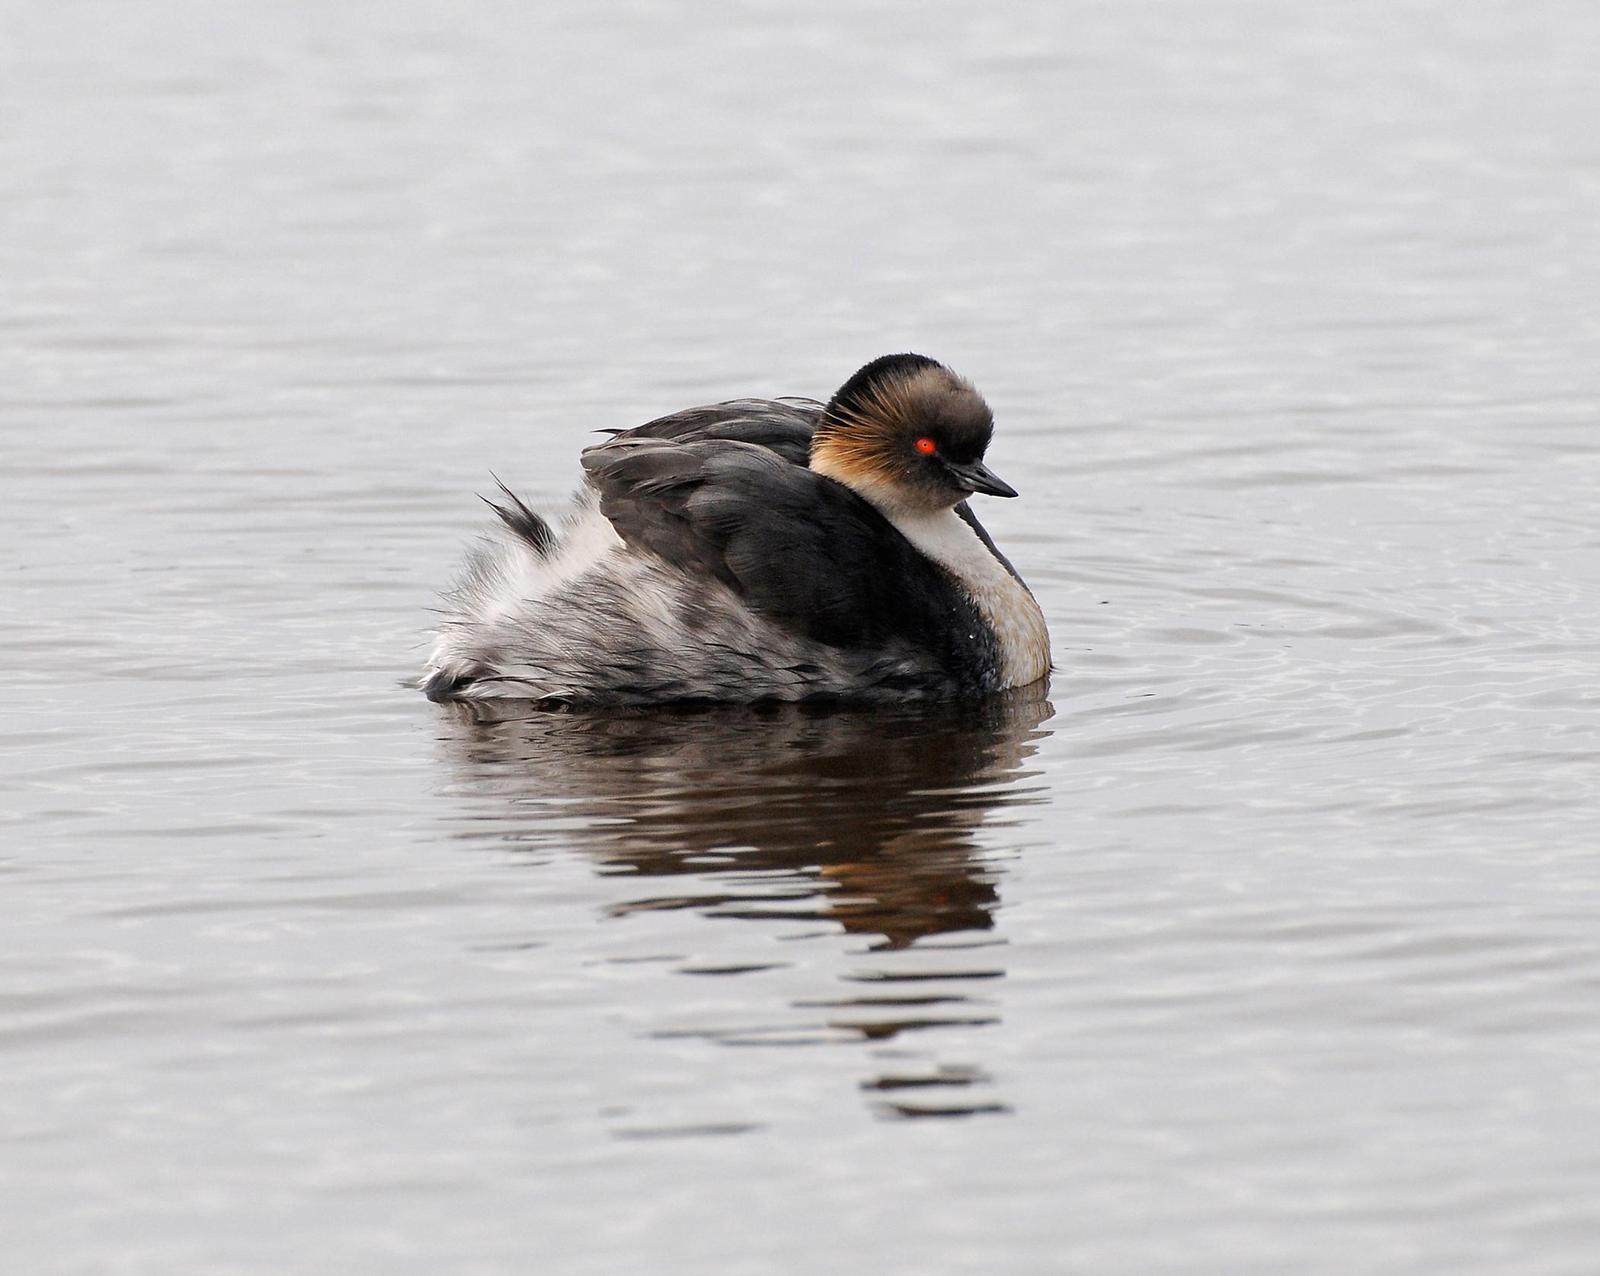 Silvery Grebe Photo by marion dobbs